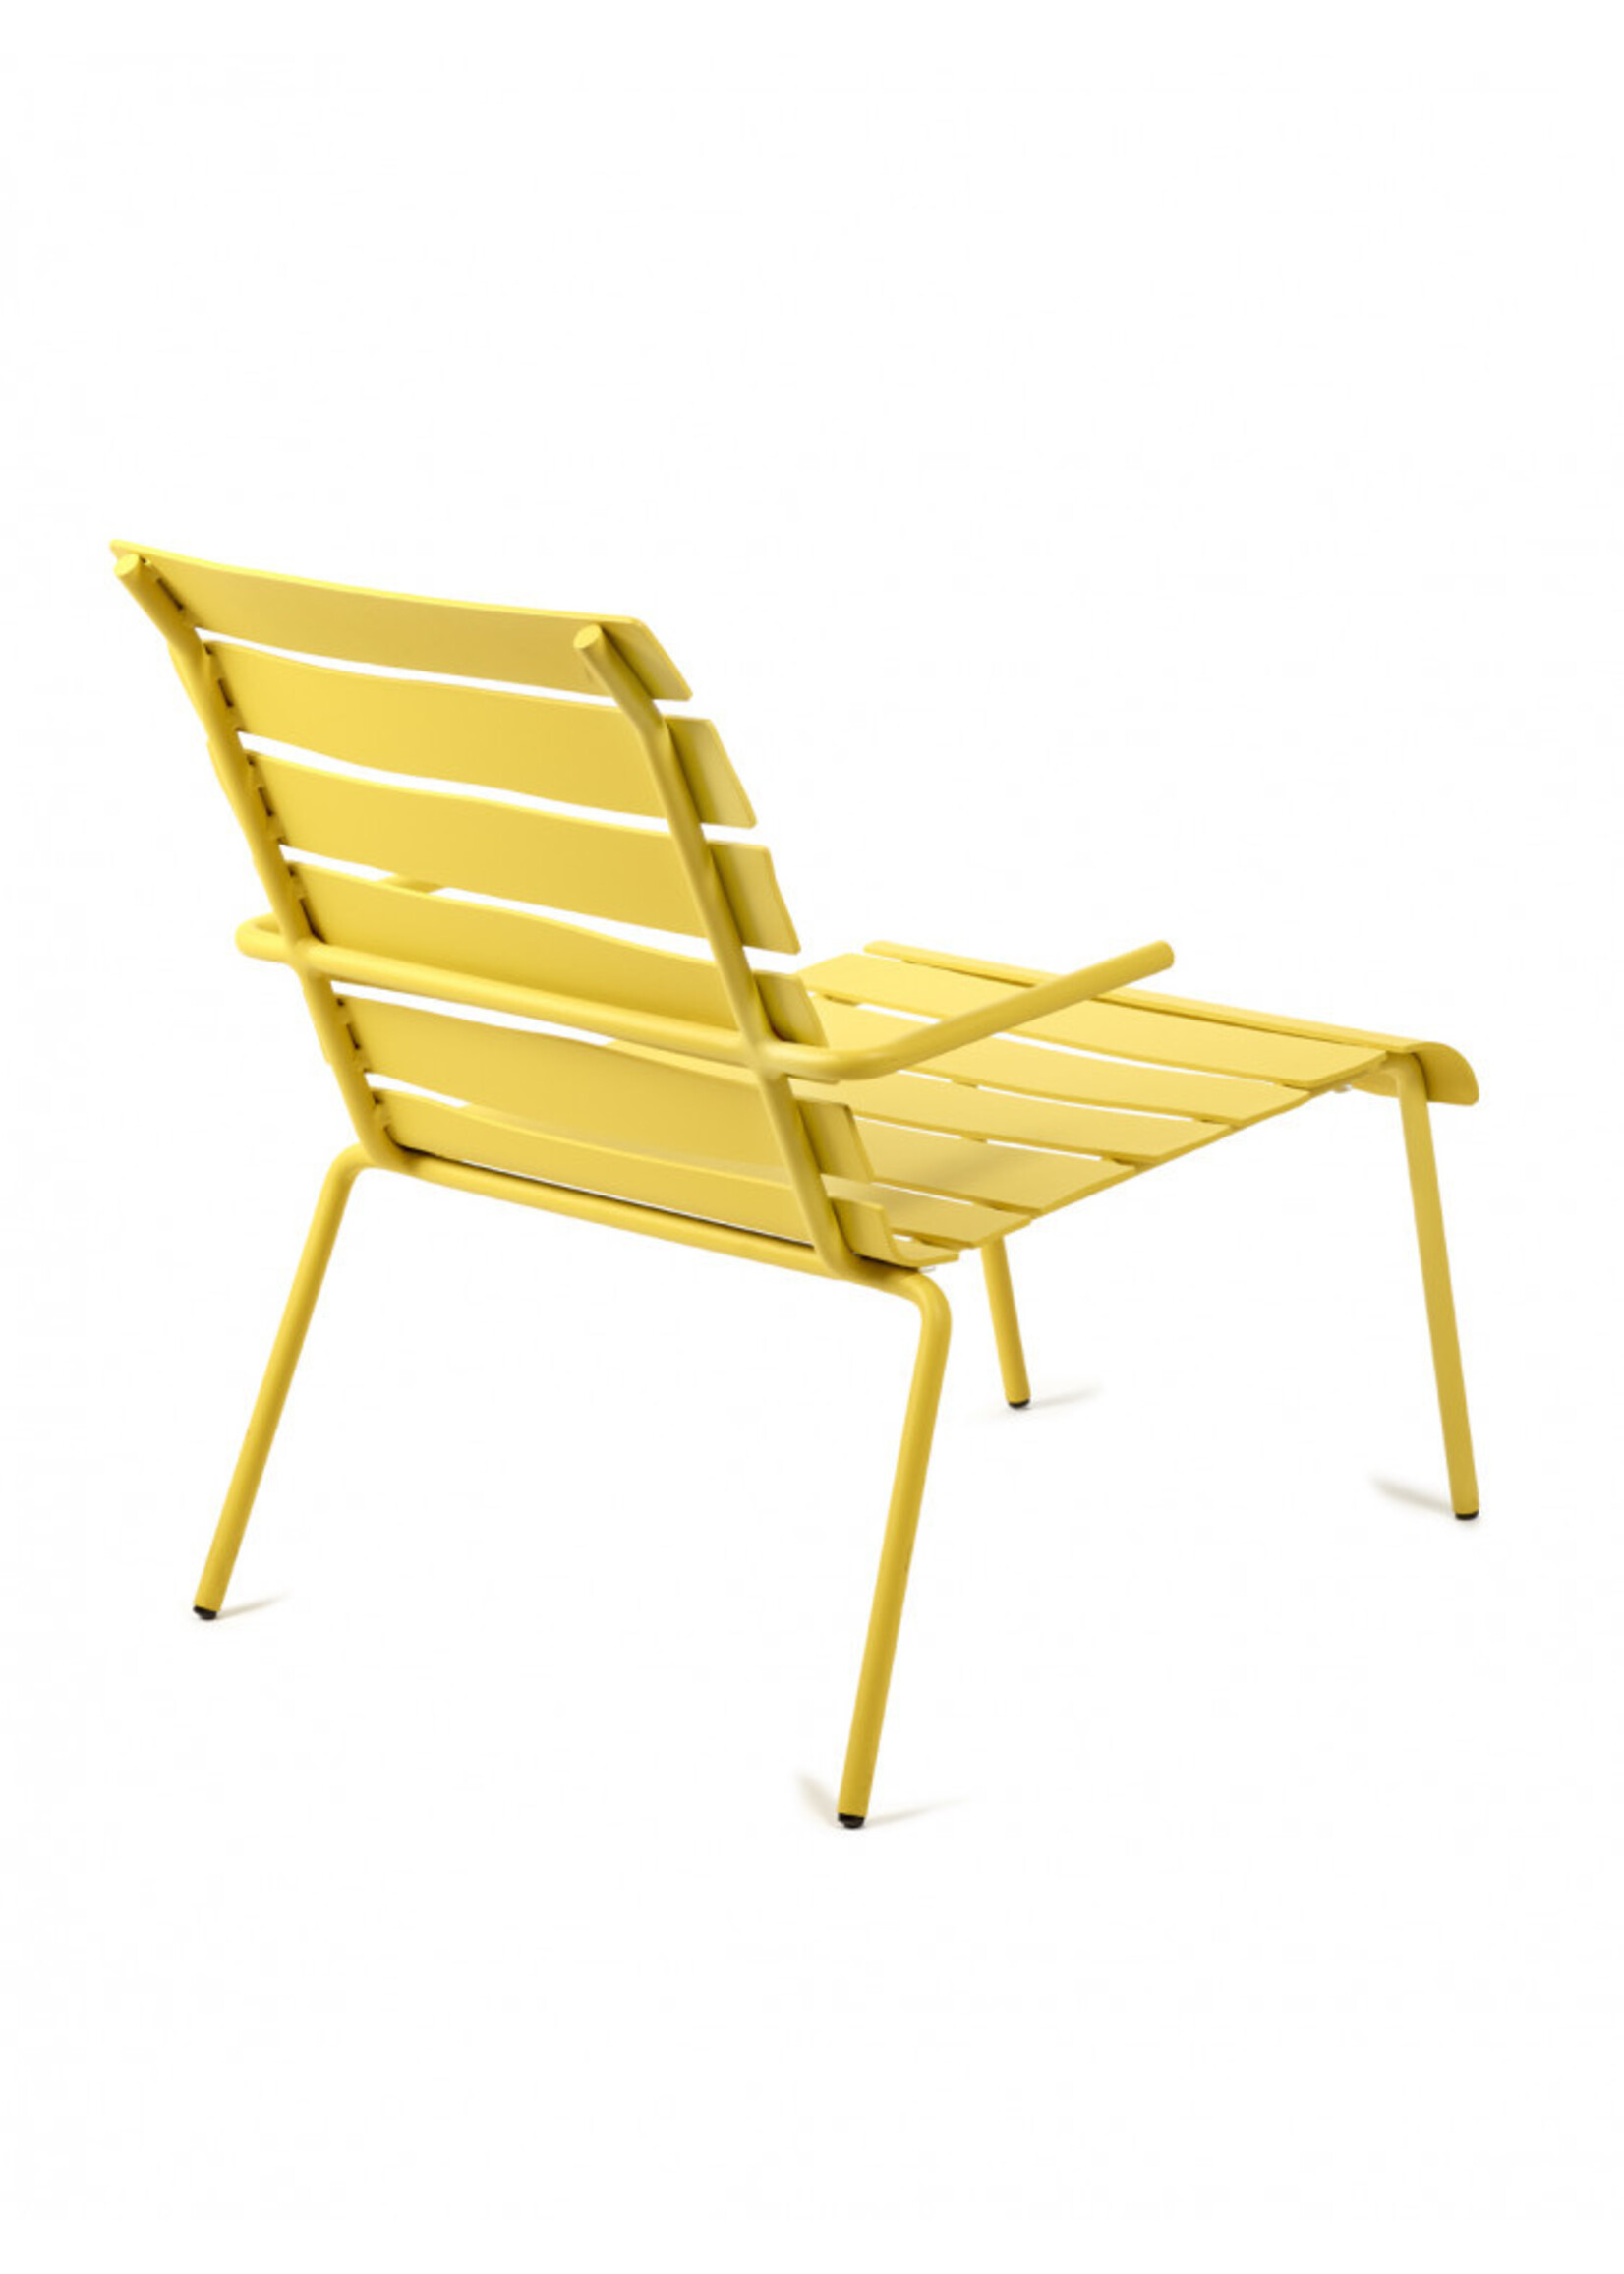 Valerie Objects Aligned - Outdoor - Lounge Chair - Yellow